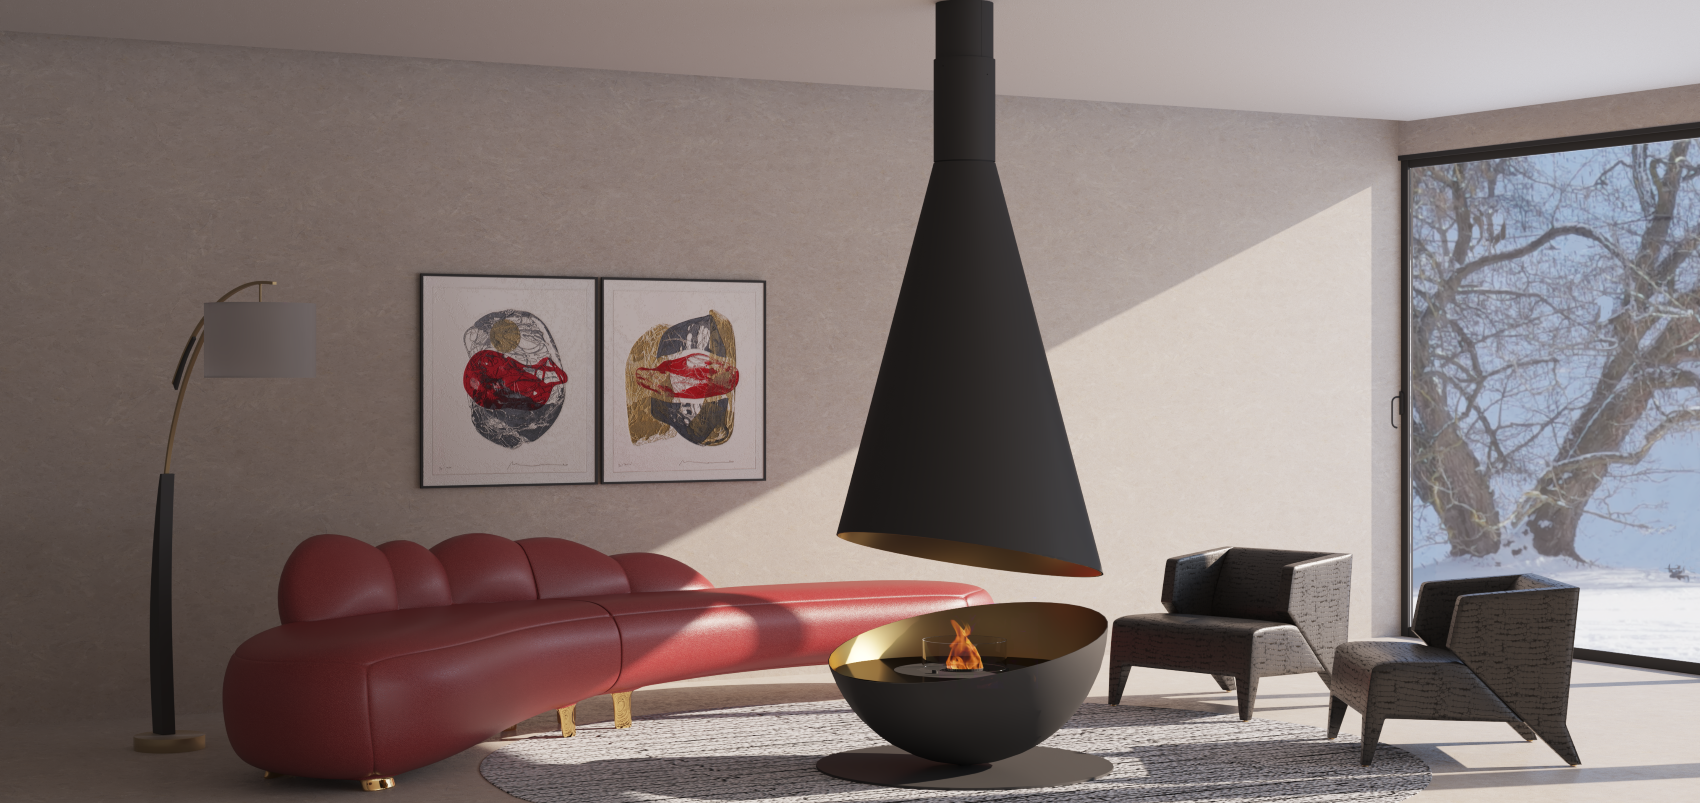 Glammfire suspended fireplace in contemporary living room